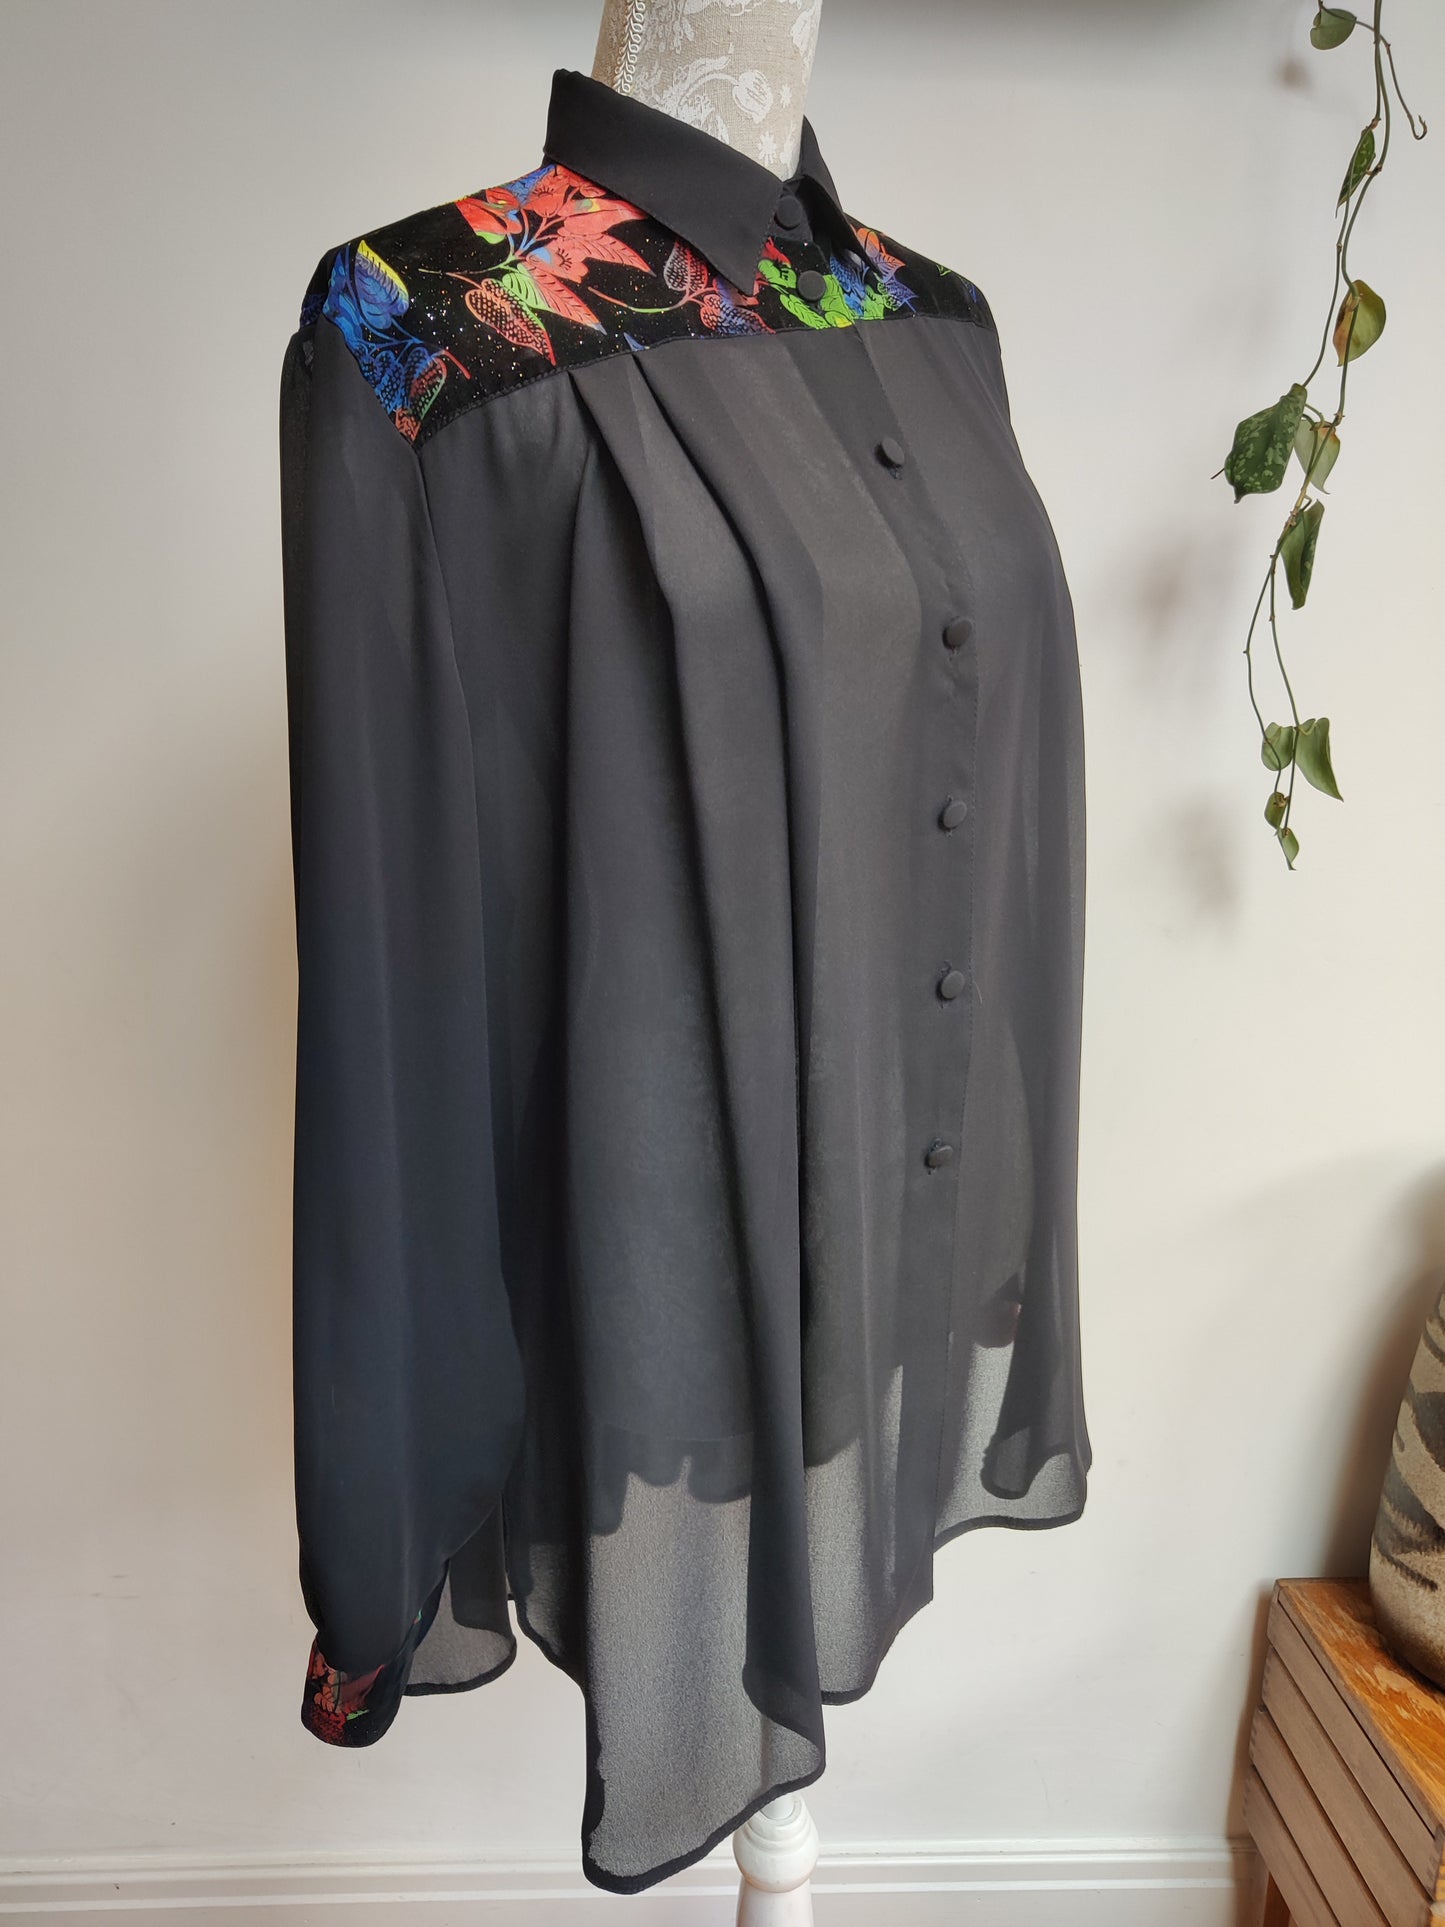 Stunning vintage black tunic shirt with sparkly floral collar. Size 26.